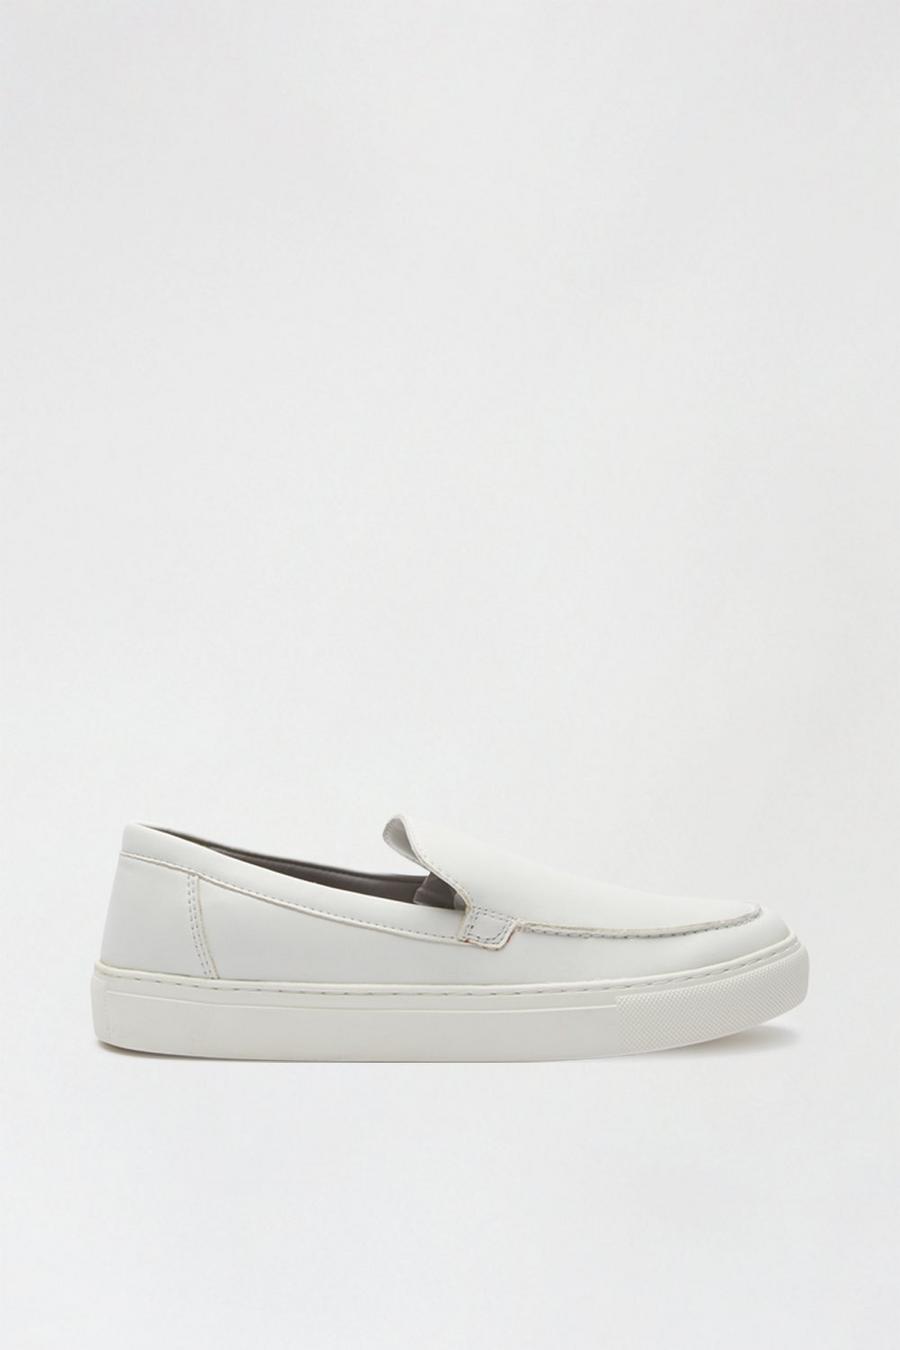 Suede Look Slip On Shoes